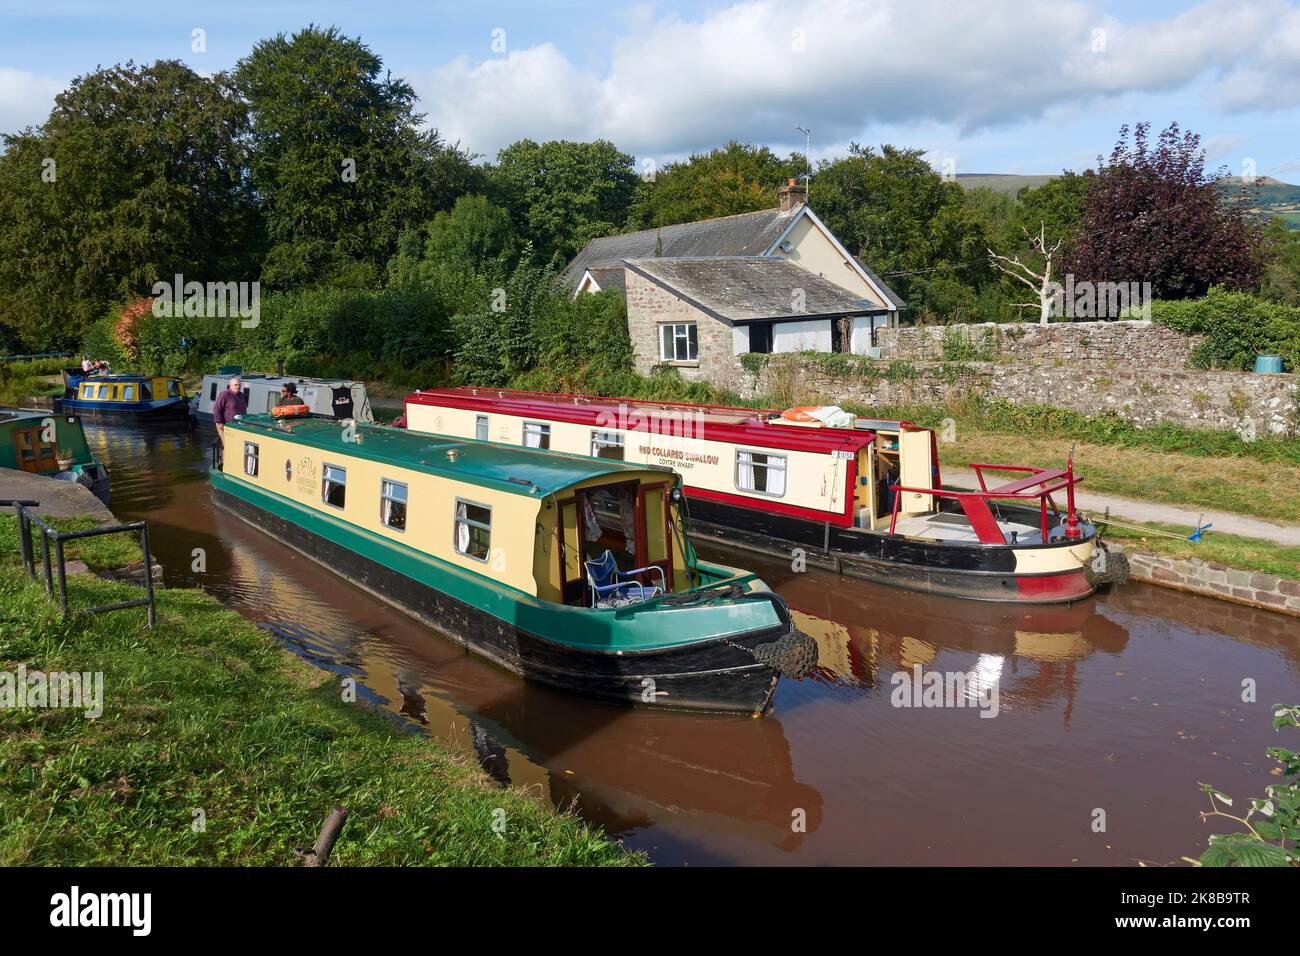 Narrowboats on the Monmouthshire and Brecon Canal at Llangattock, Powys, Wales. Stock Photo